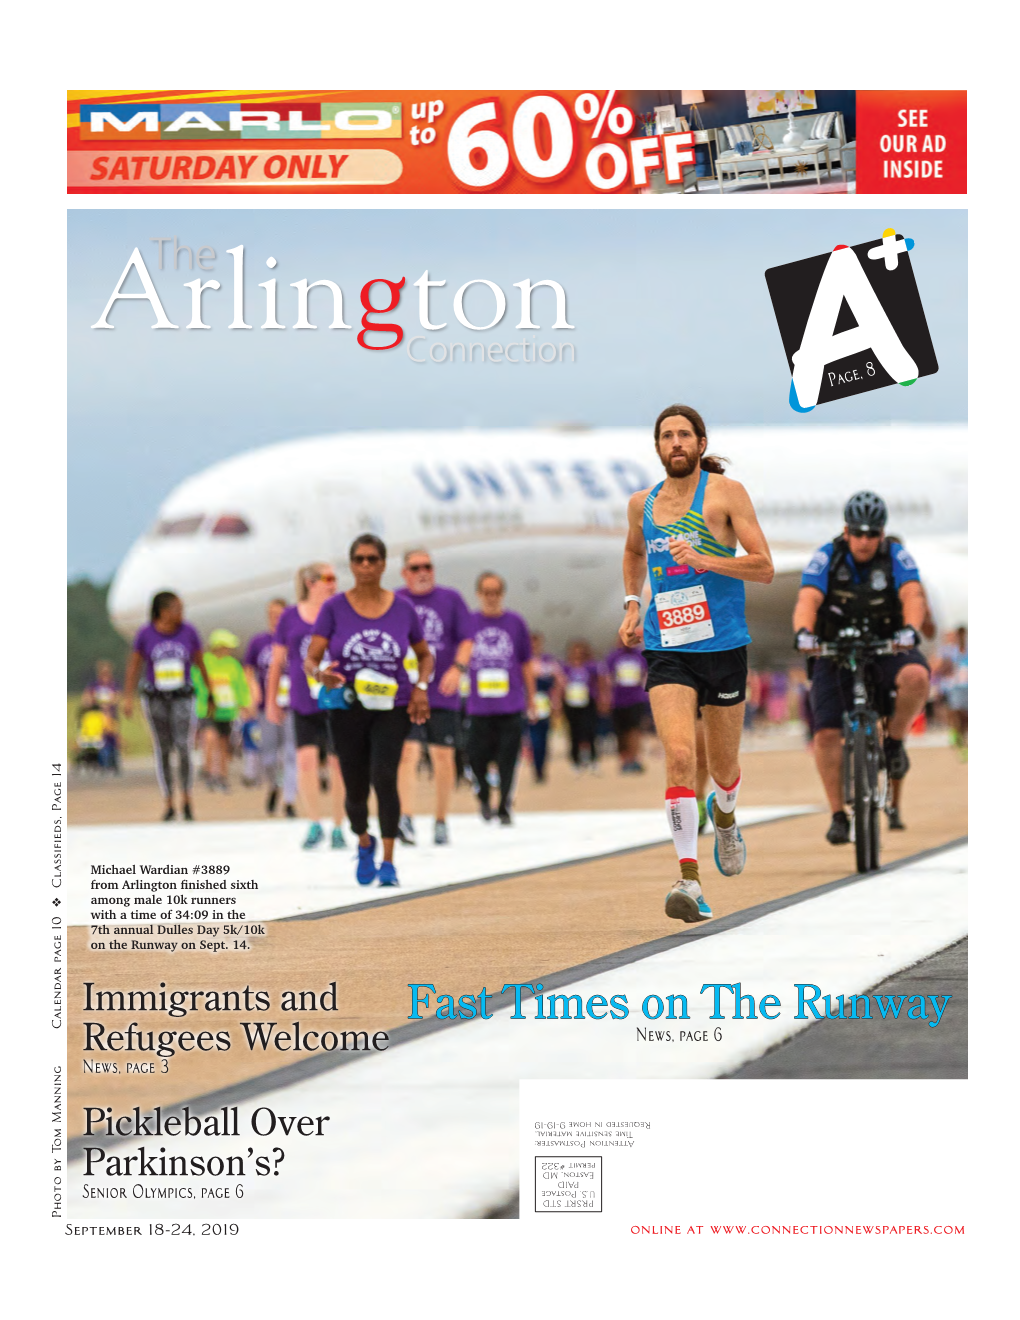 Arlington Finished Sixth Among Male 10K Runners with a Time of 34:09 in the 7Th Annual Dulles Day 5K/10K on the Runway on Sept